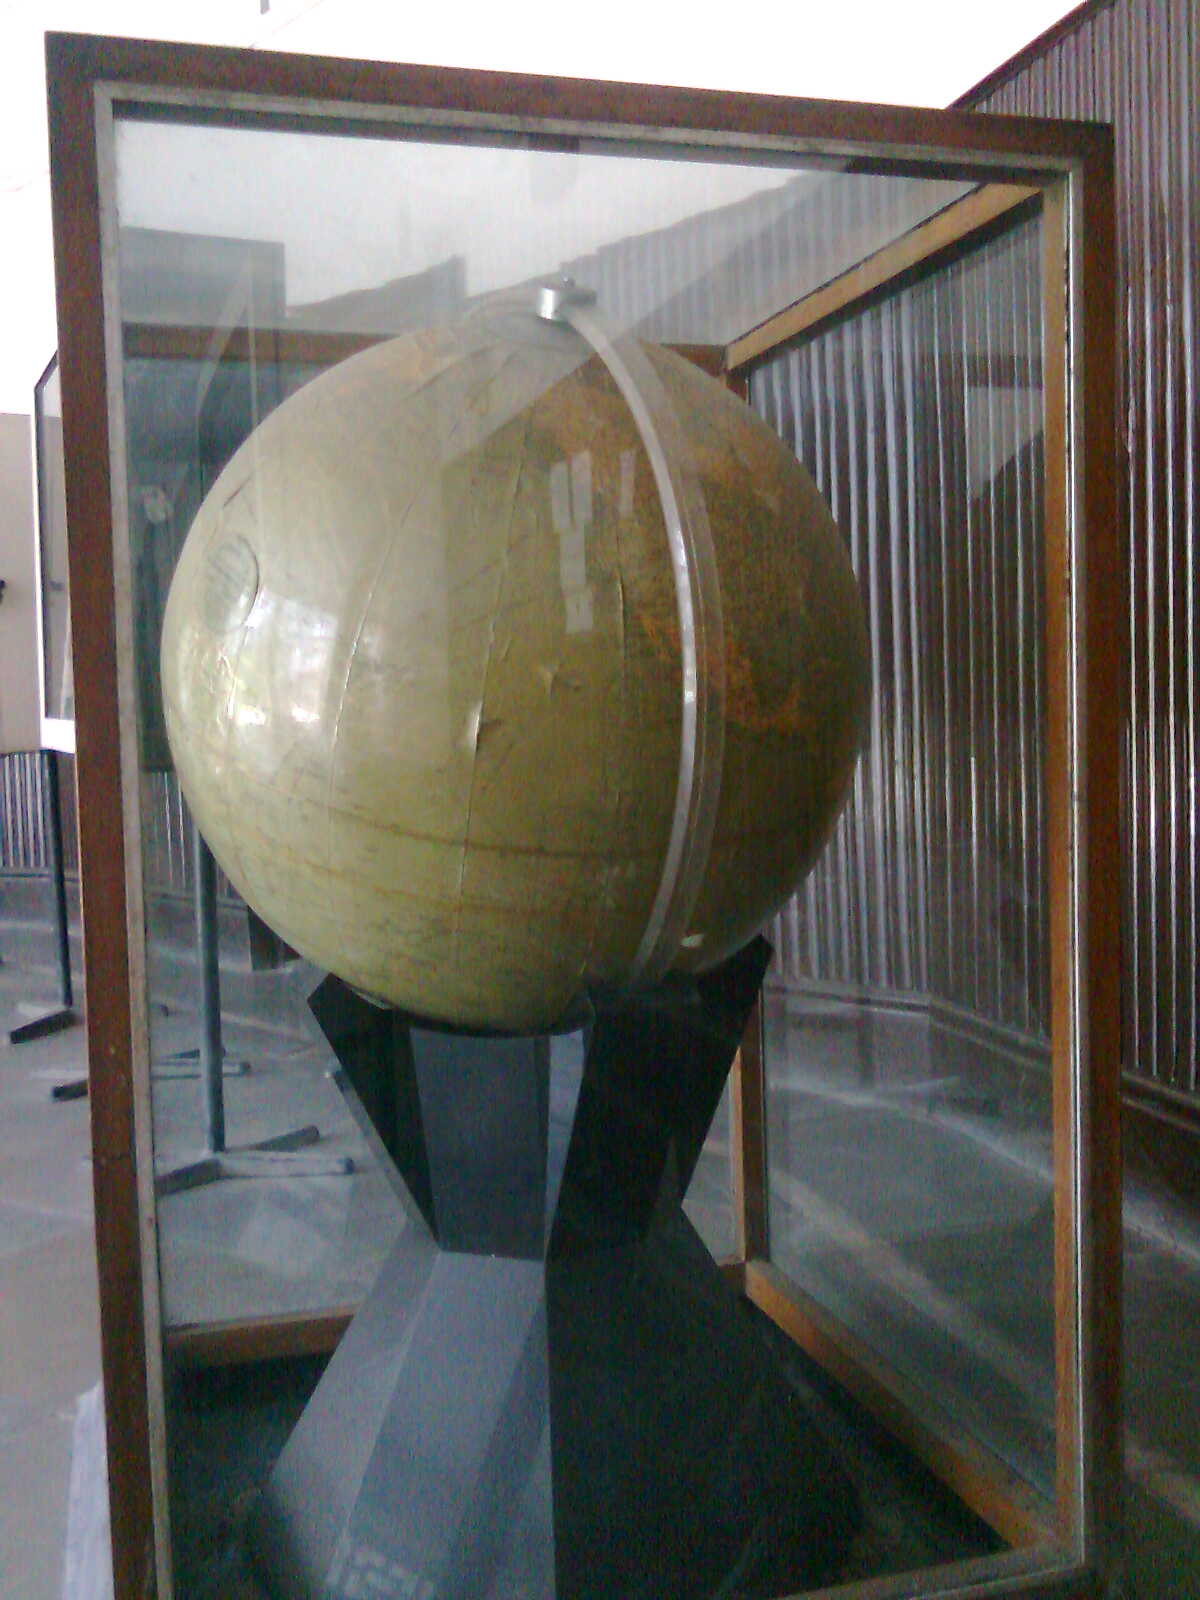 Giant Globe at the Central Hall, Central State Library, Patiala